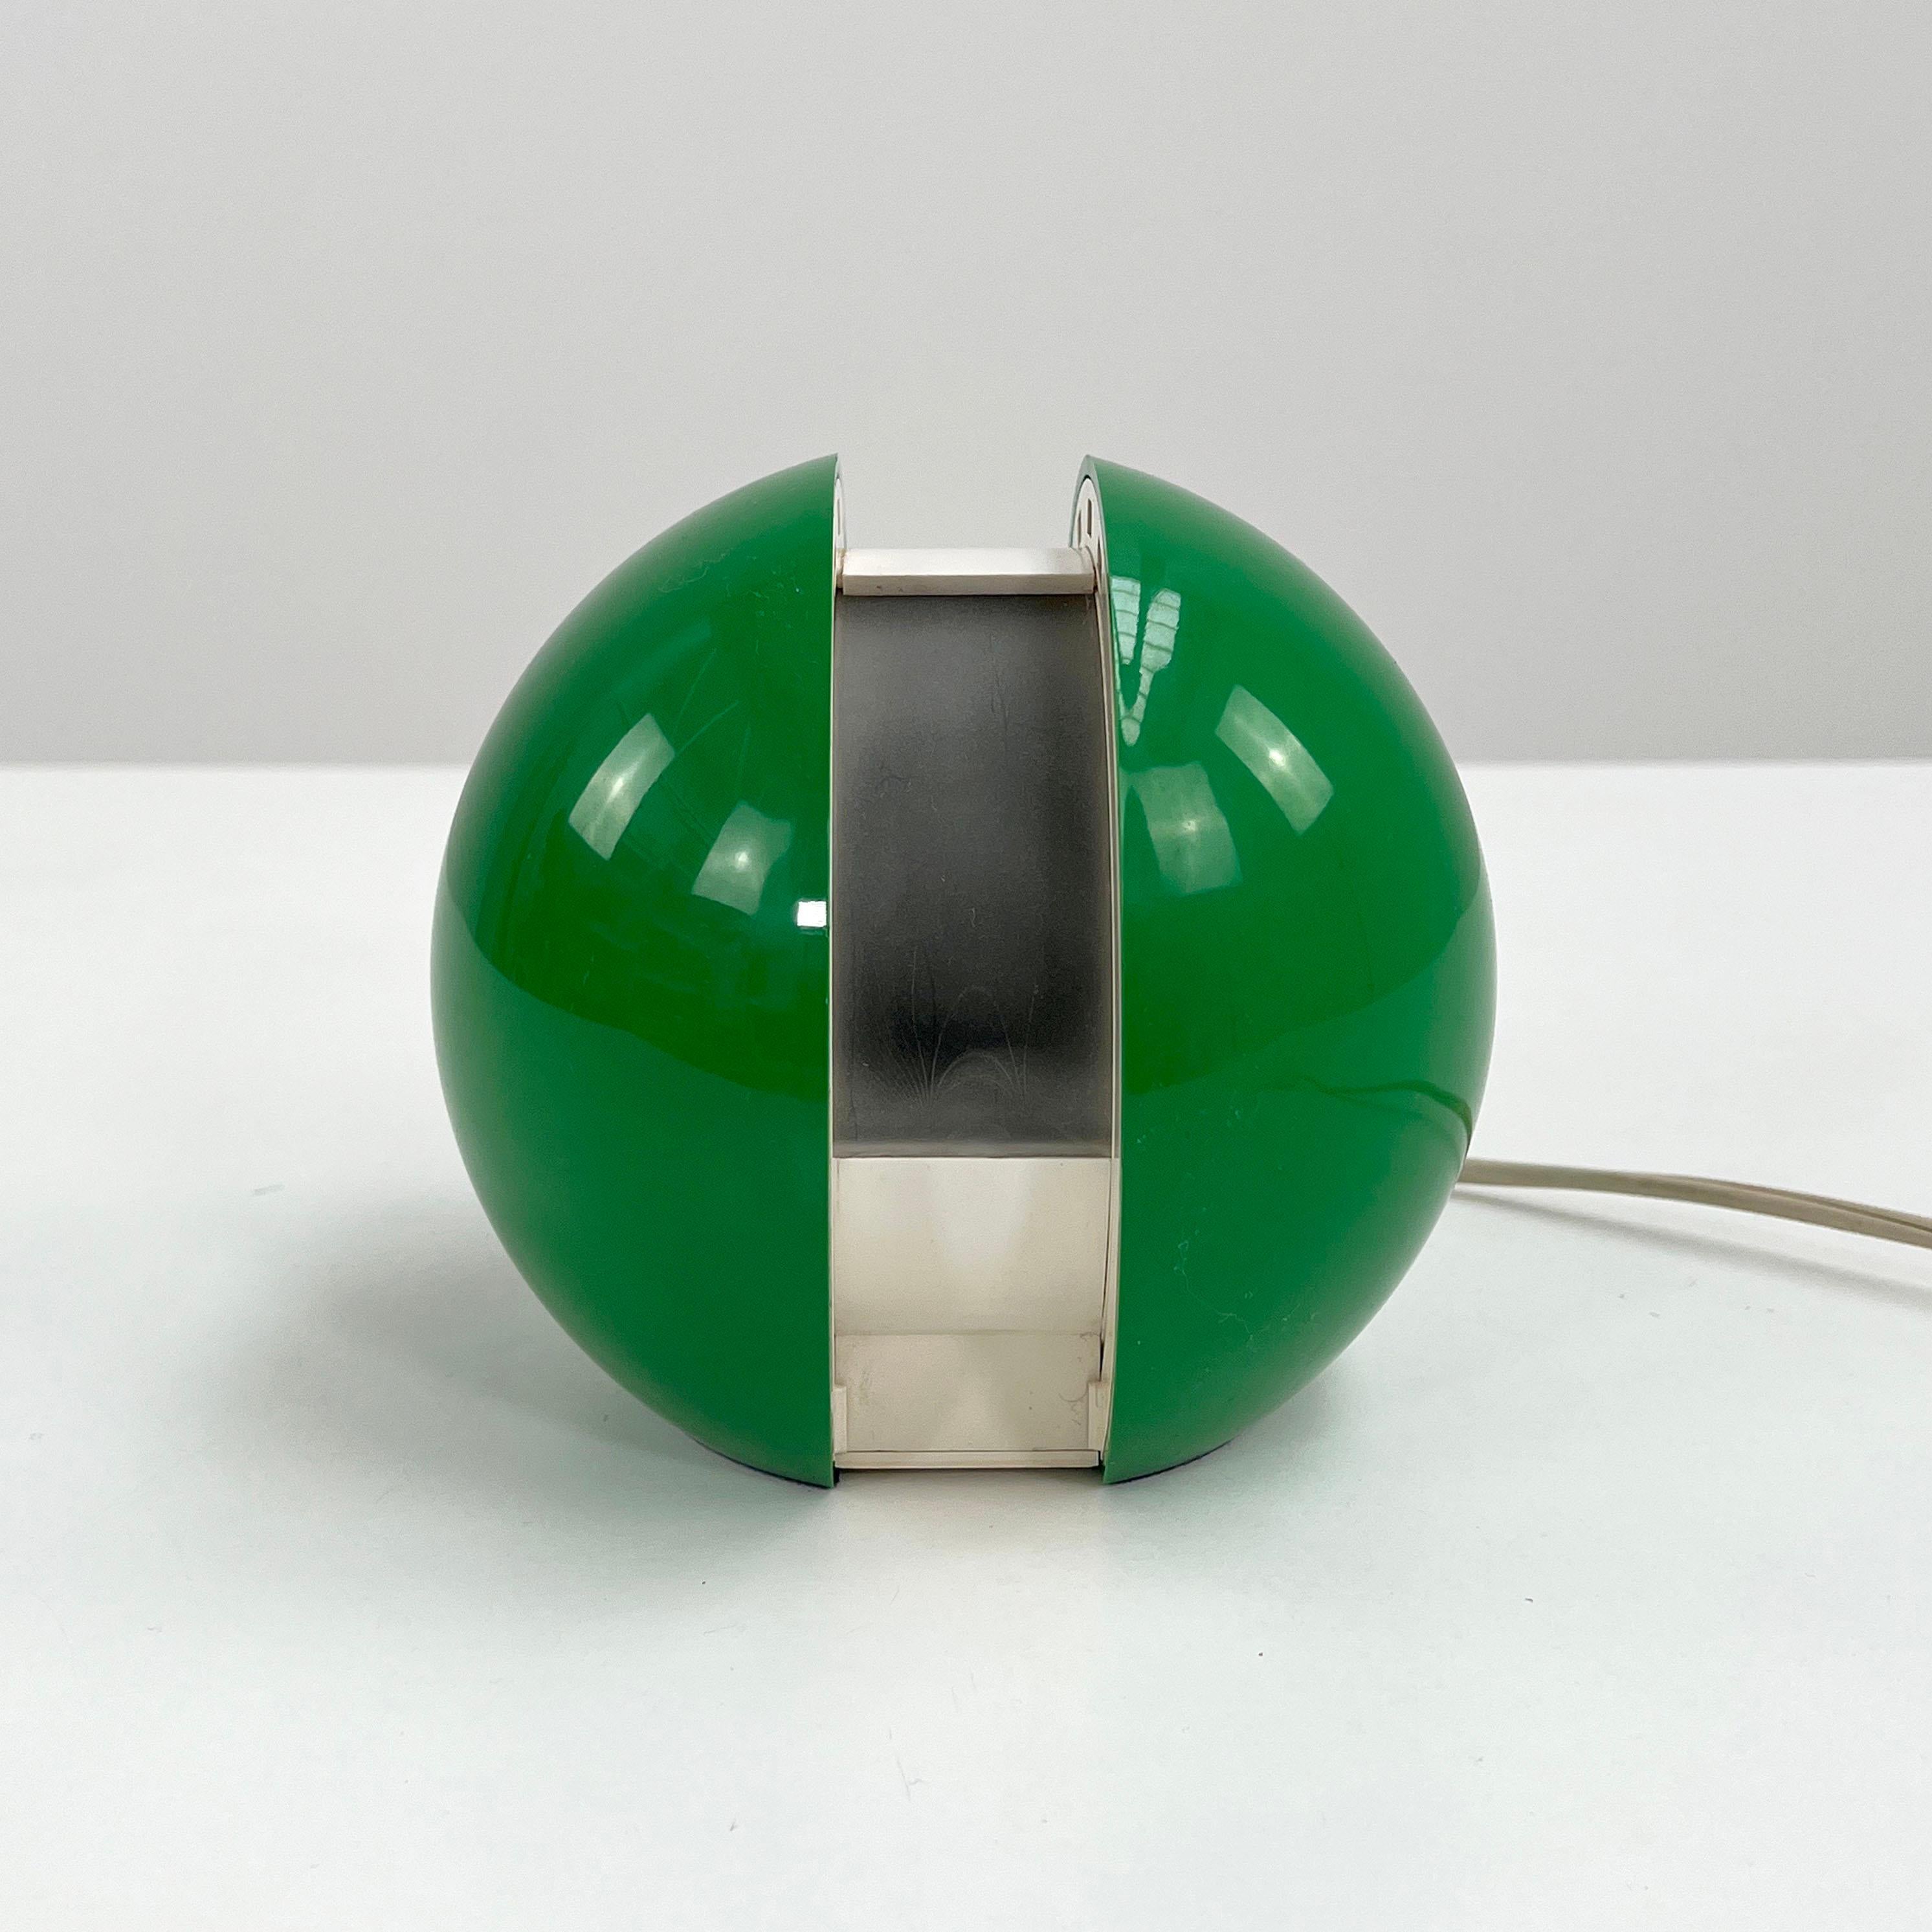 Green GEA lamp by Gianni Colombo for Arredoluce, 1960s
Designer - Gianni Colombo
Producer - Arredoluce
Model - GEA Lamp
Design Period - Sixties
Measurements - Width 16 cm x Depth 14 cm x Height 13 cm 
Materials - Plastic
Color - Green,